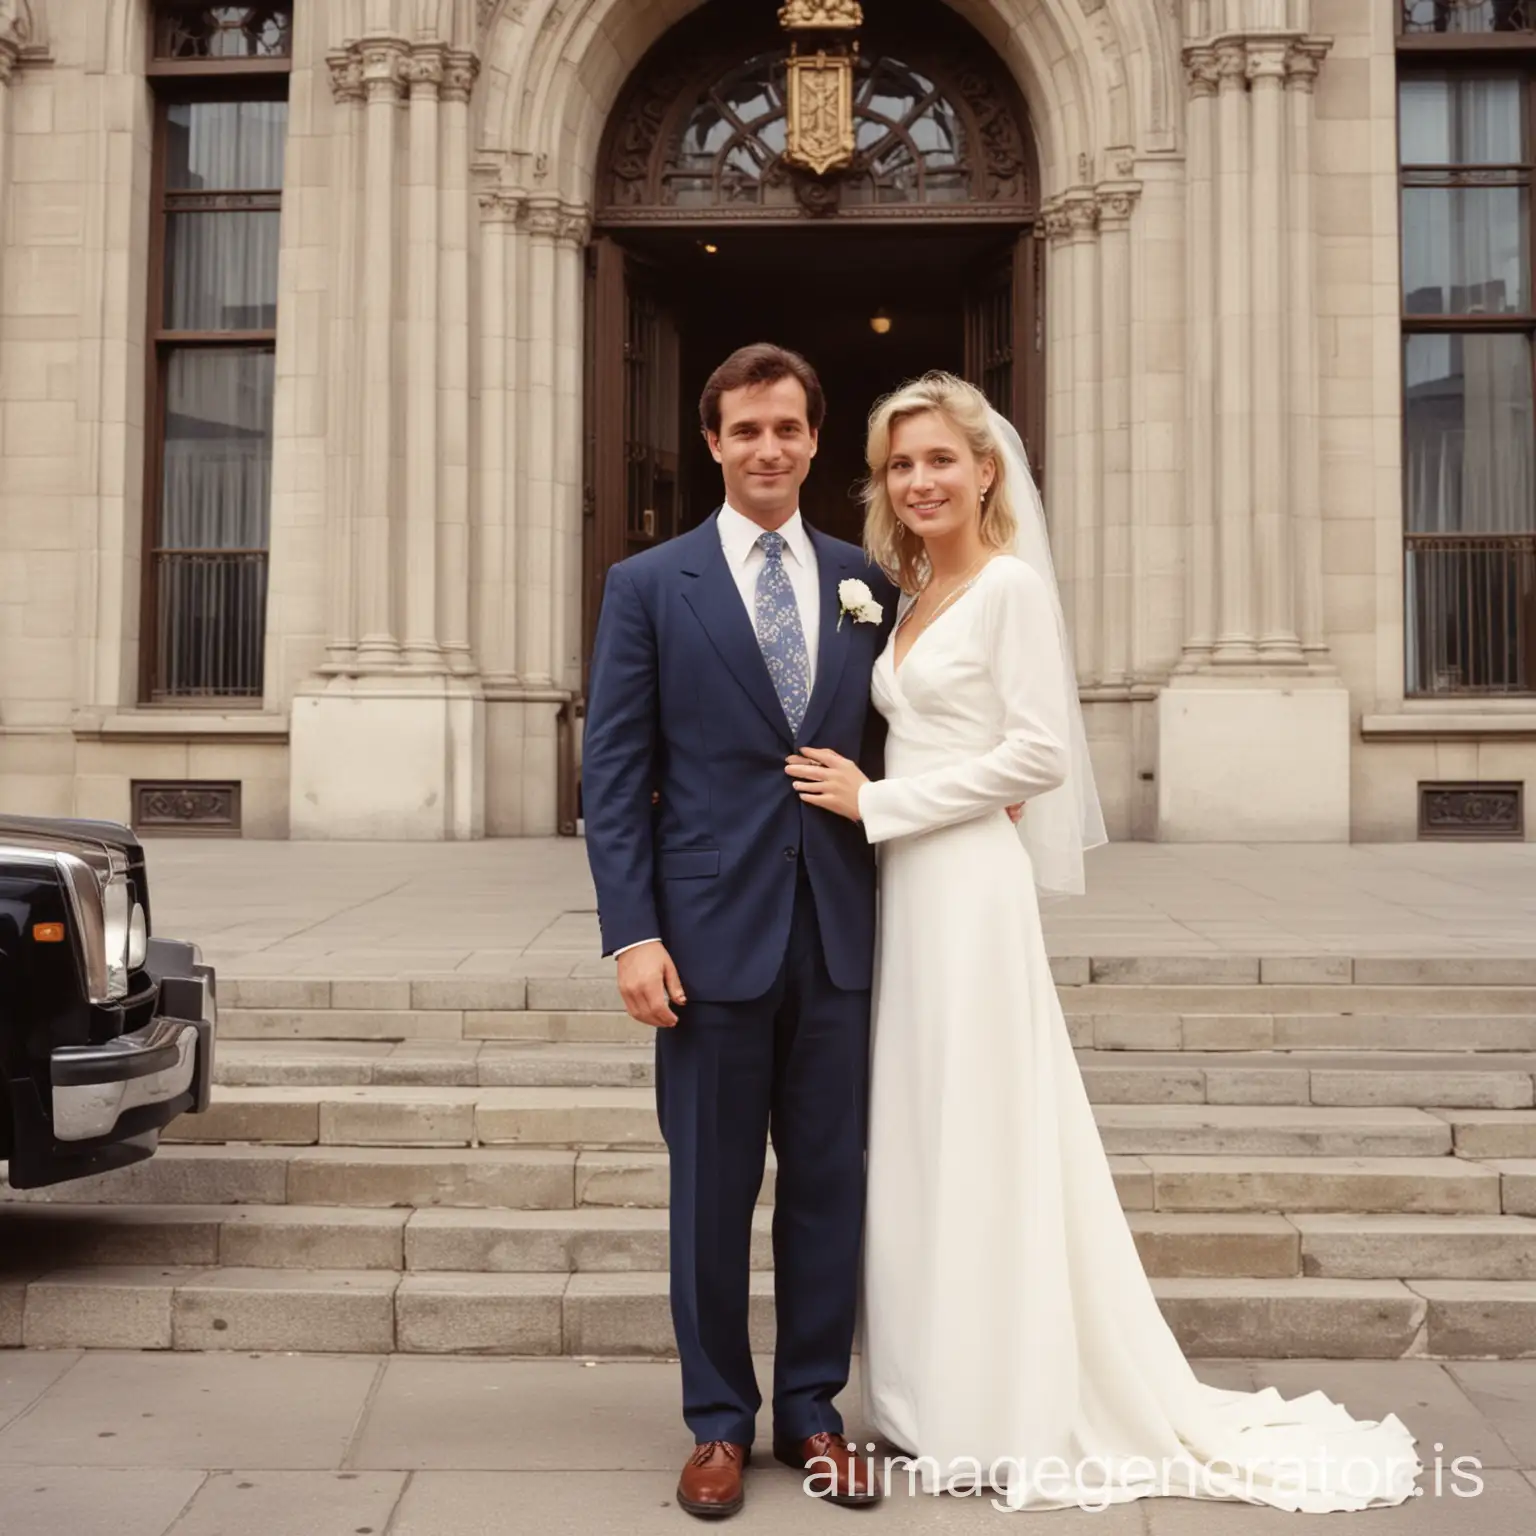 a guy of 39 years old and his beautiful blonde wife of 38 years old on their wedding day, with a simple but beautiful dress coming out of the city hall in 1988